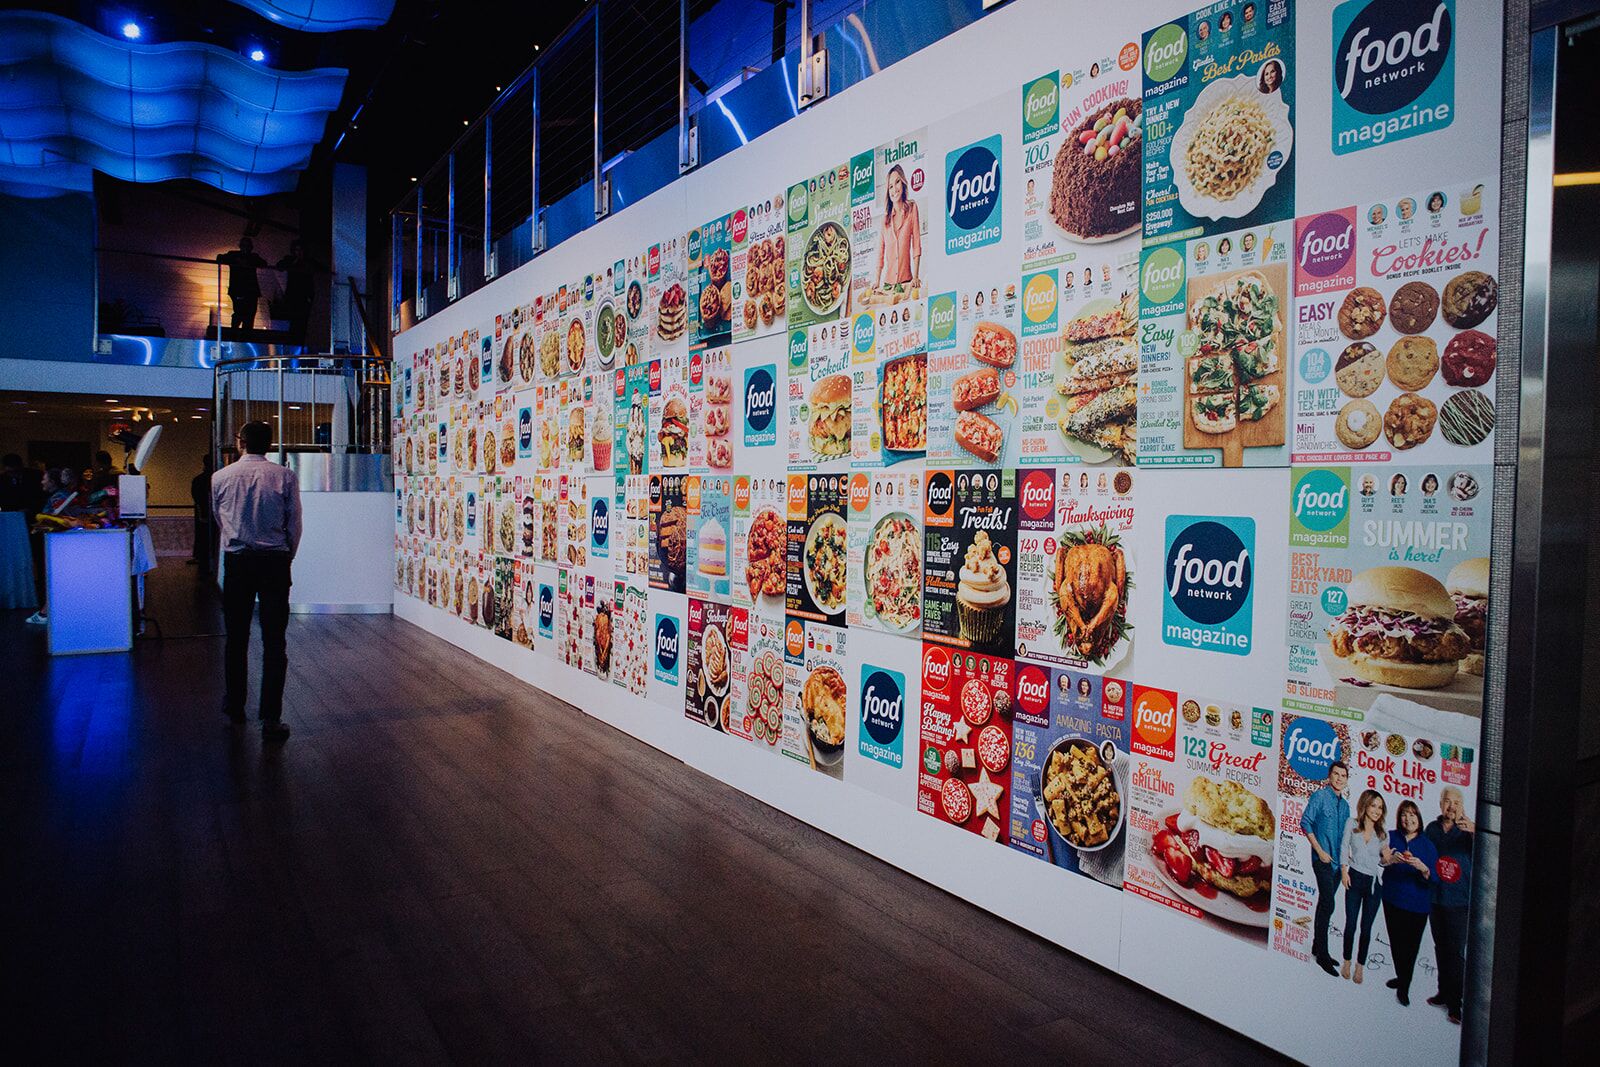 Long wall covered in Food Network magazine covers.